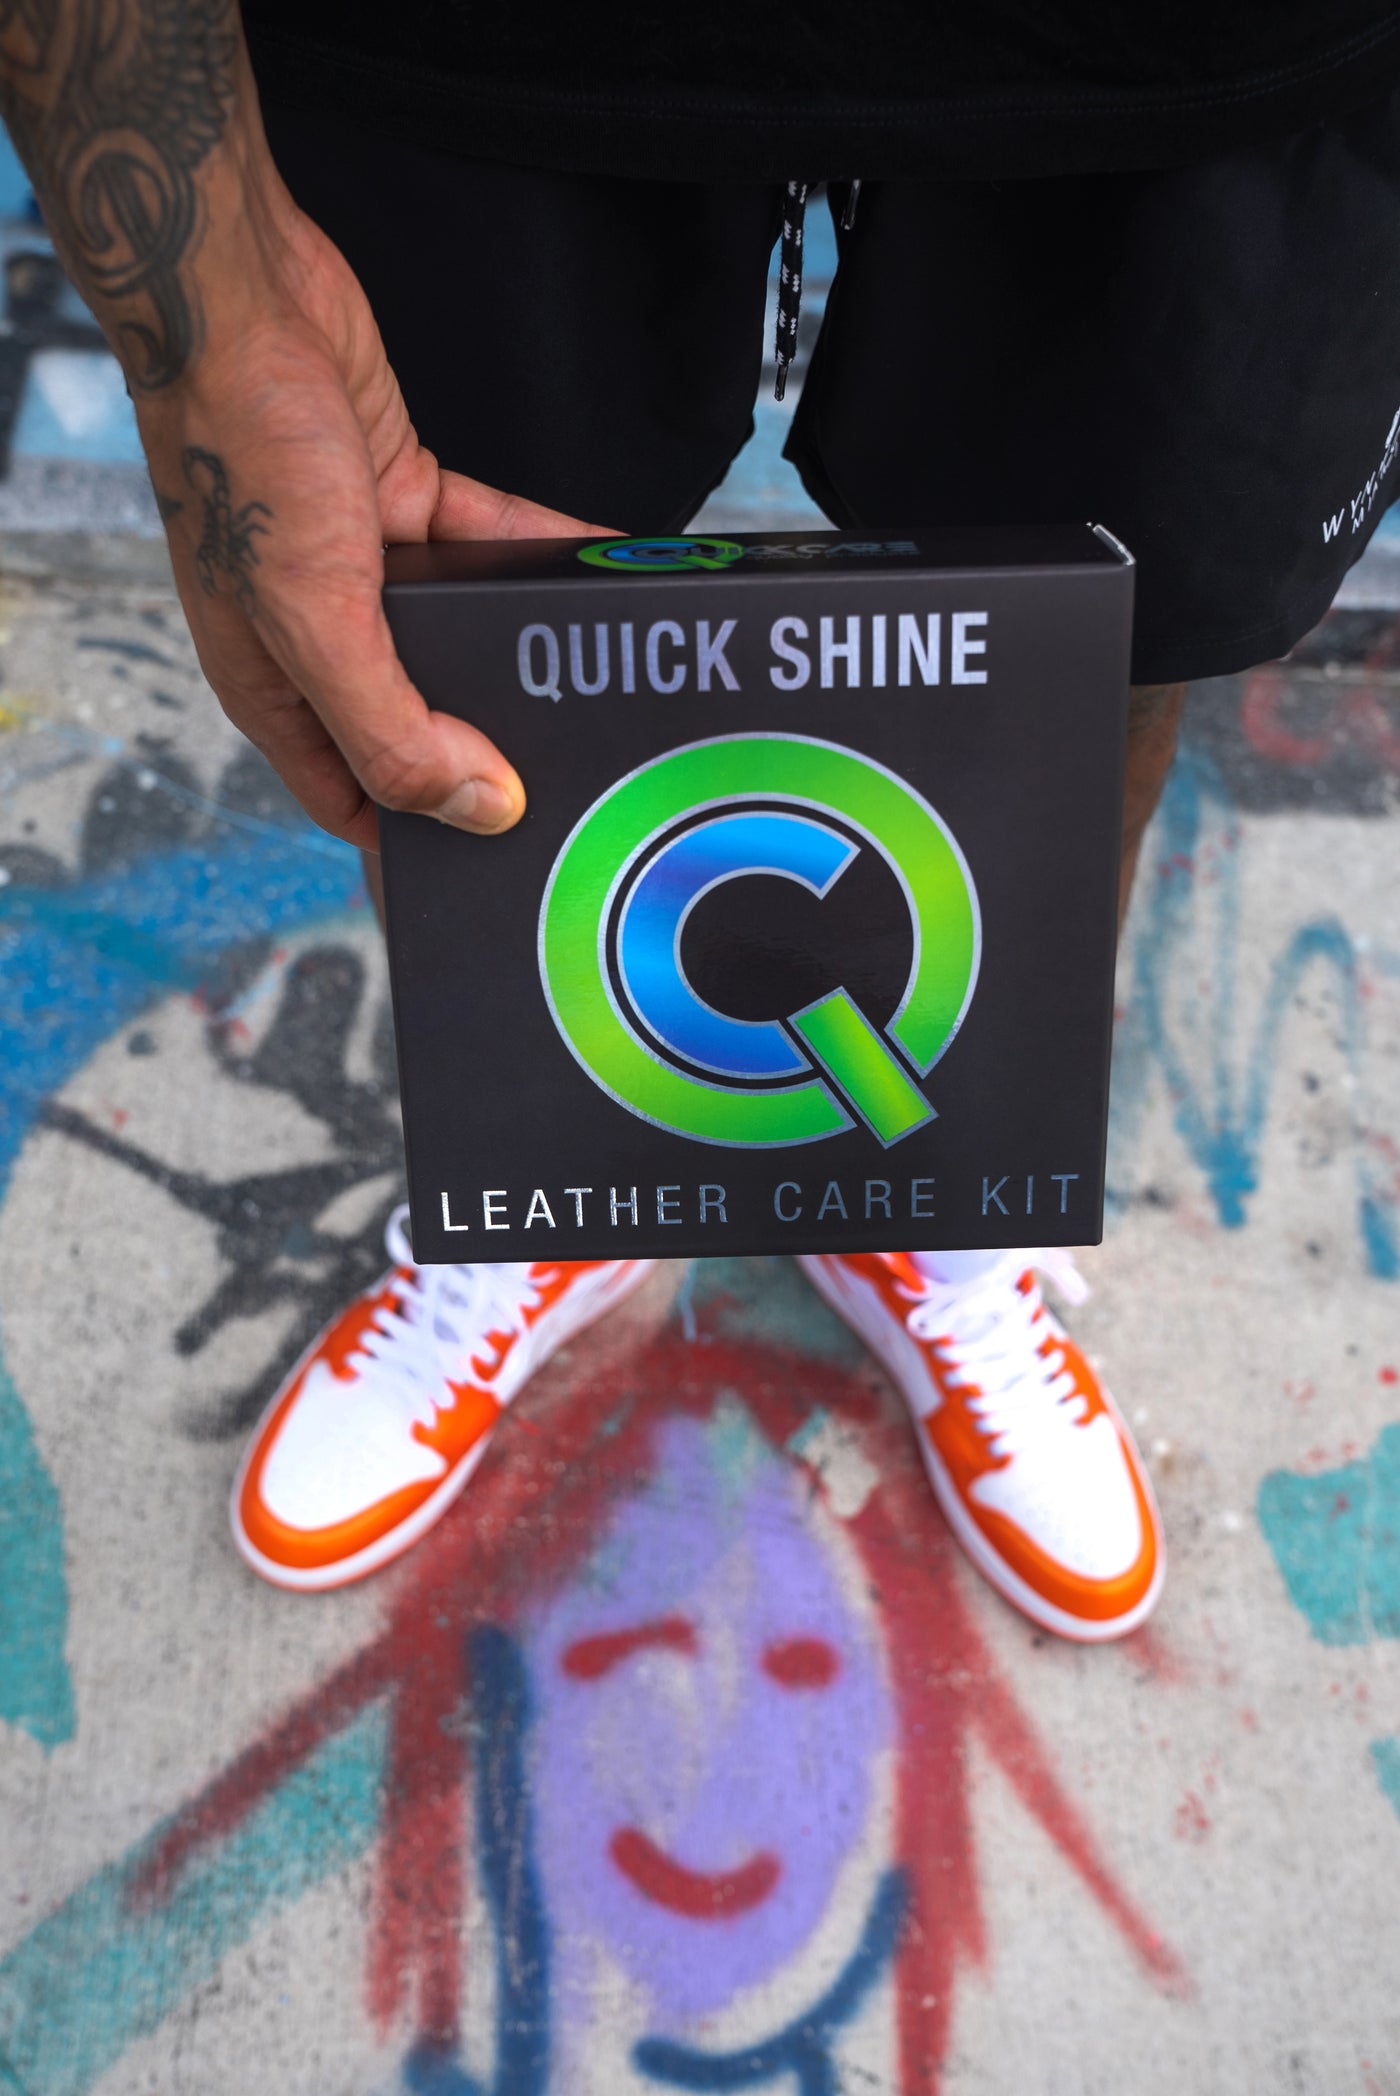 Quick Shine Leather Care Kit – quickcareproducts